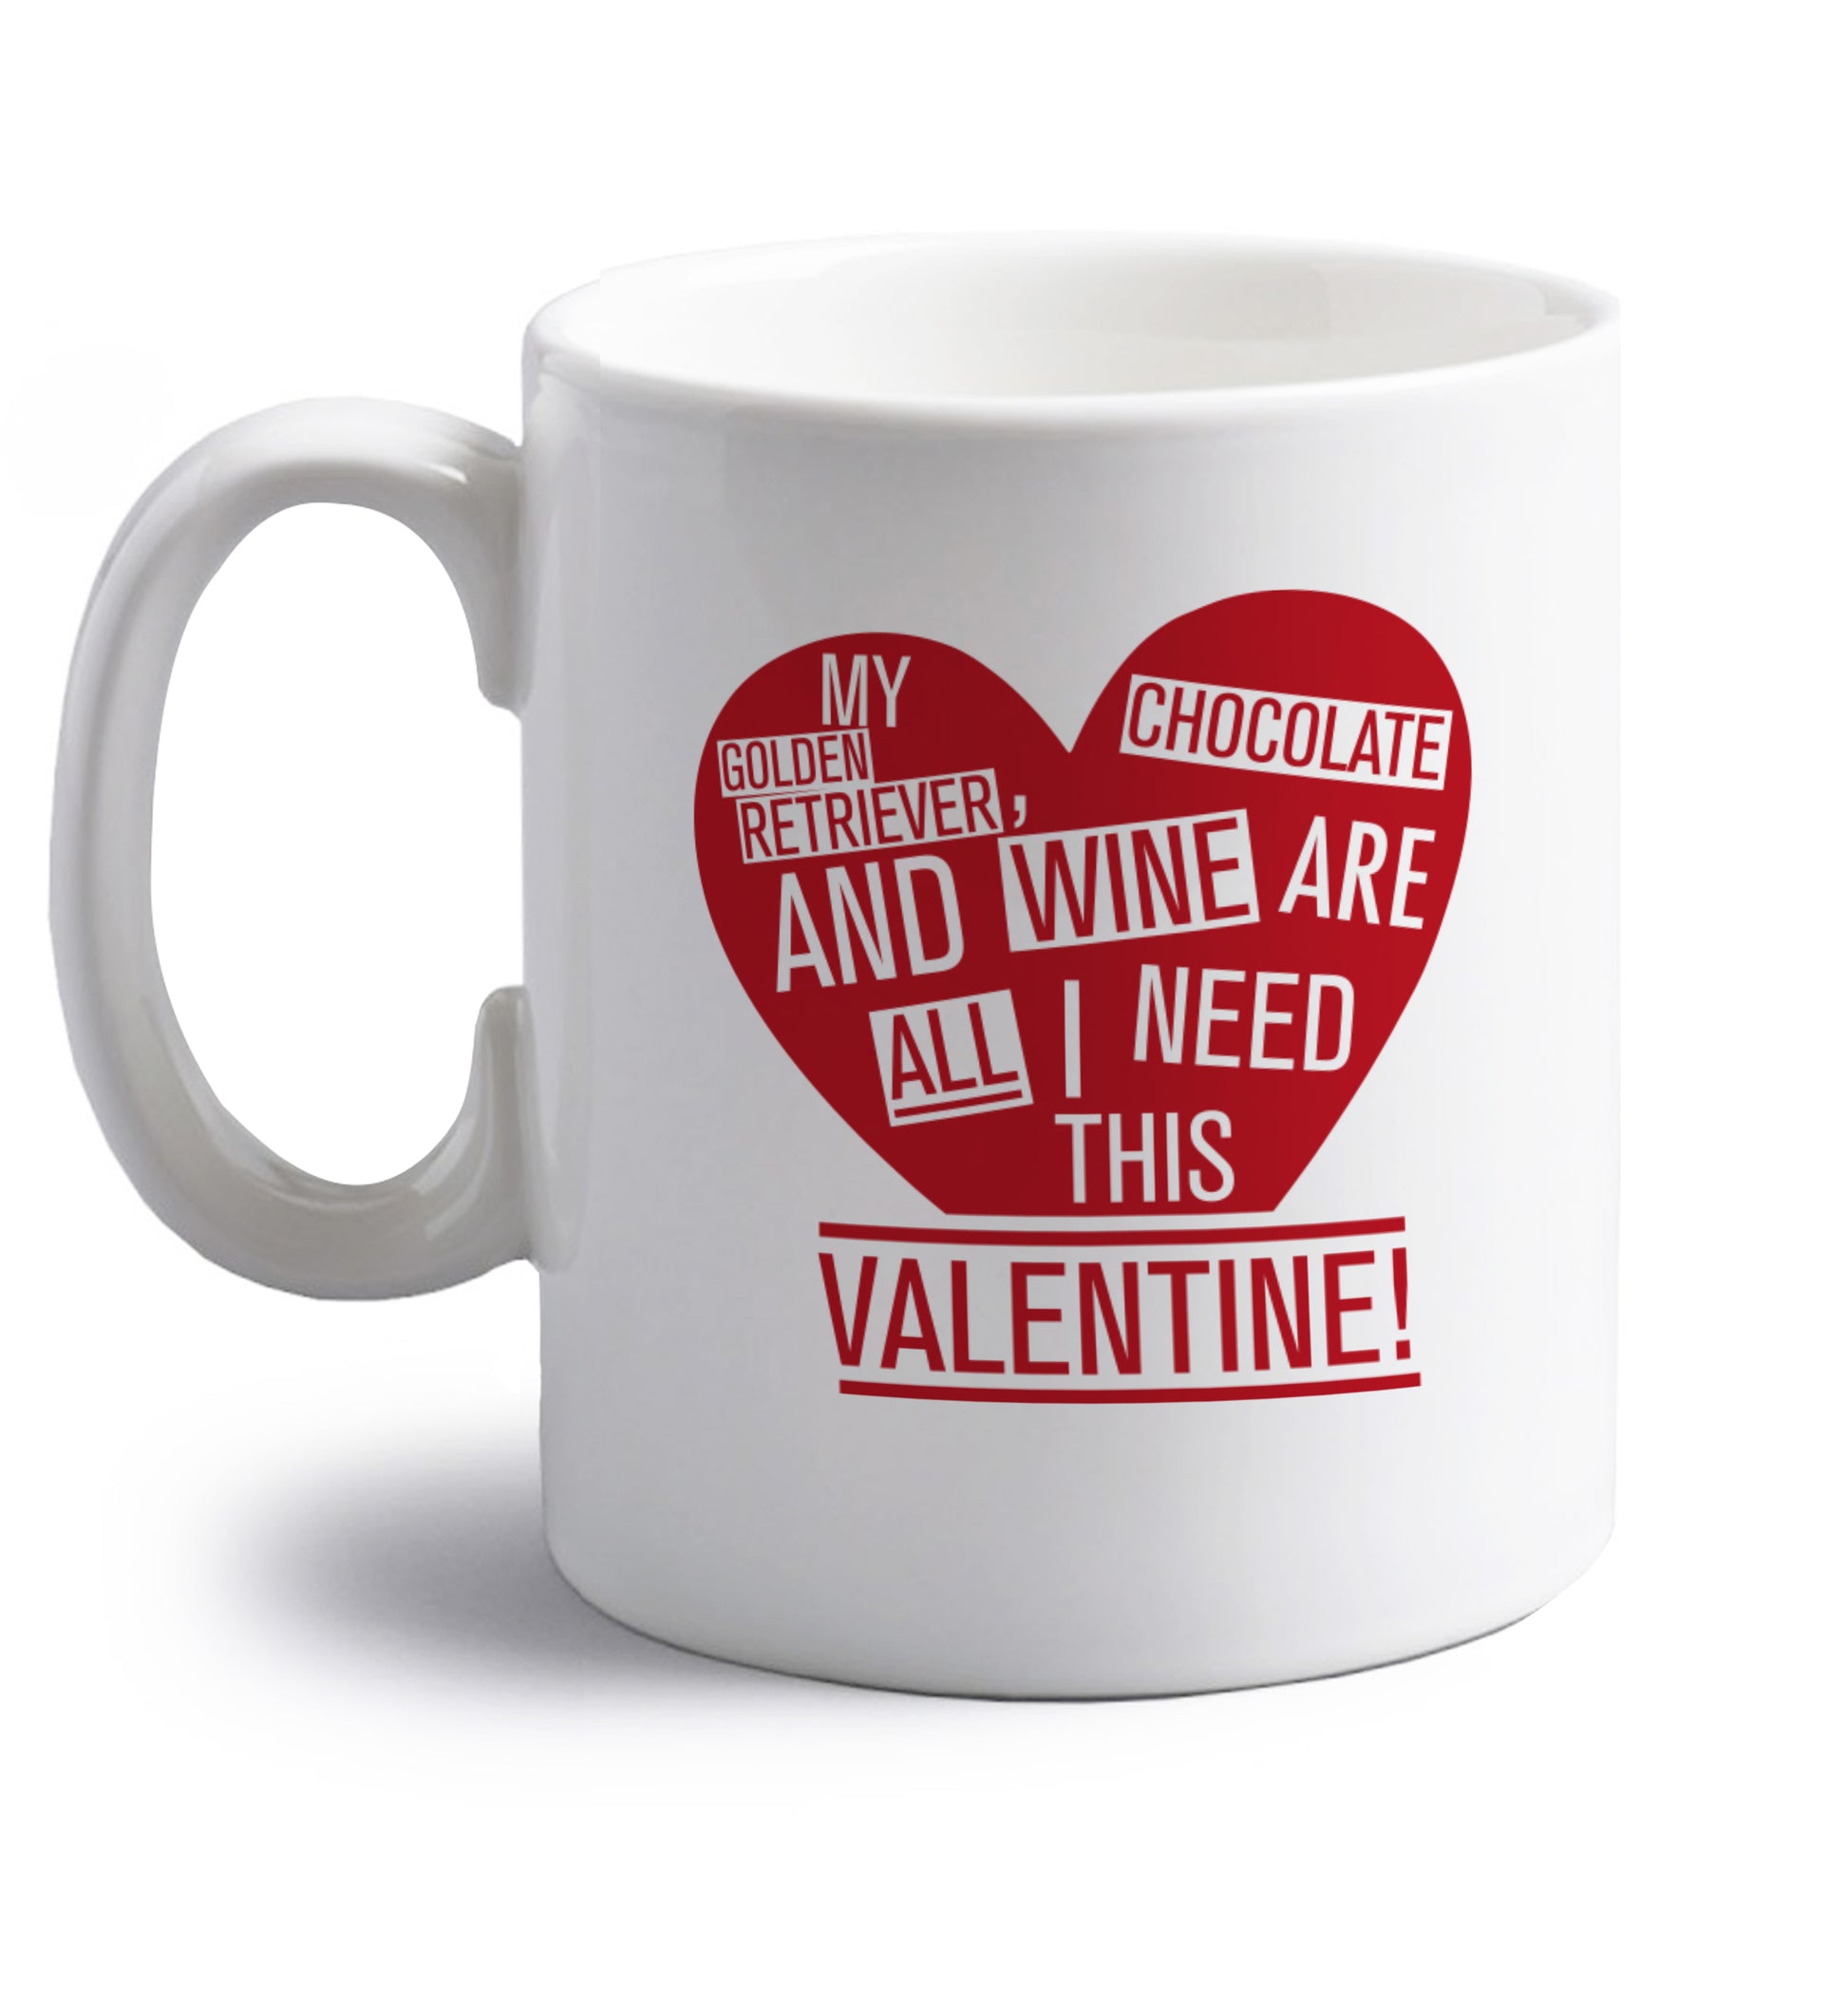 My golden retriever, chocolate and wine are all I need this valentine! right handed white ceramic mug 